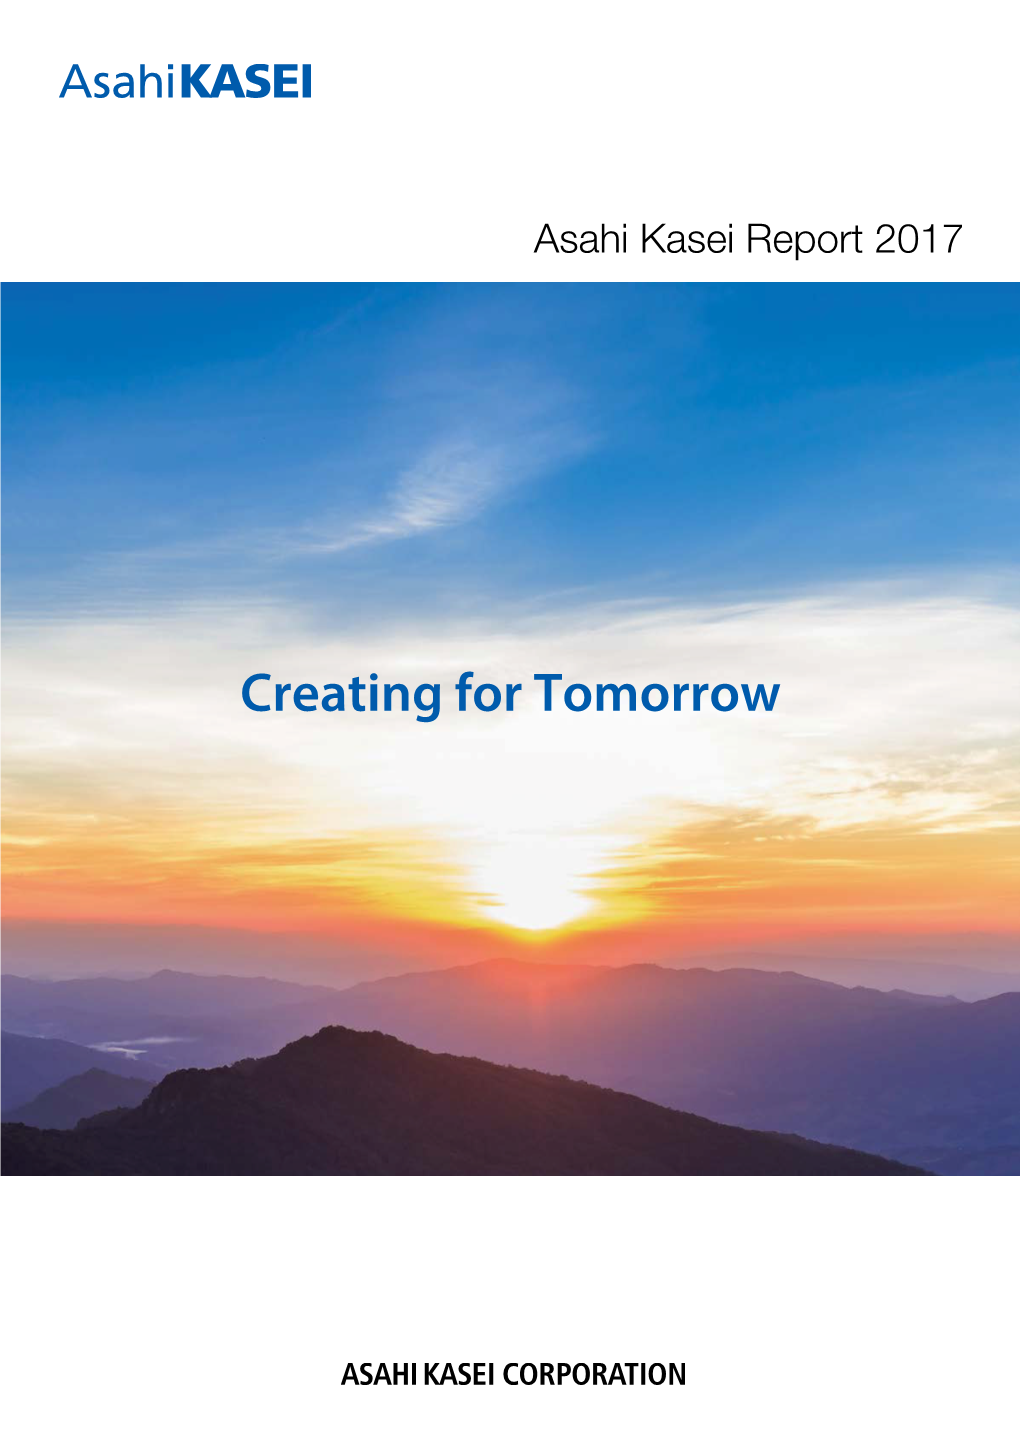 Asahi Kasei Report 2017 Group Mission We, the Asahi Kasei Group, Contribute to Life and Living for People Around the World